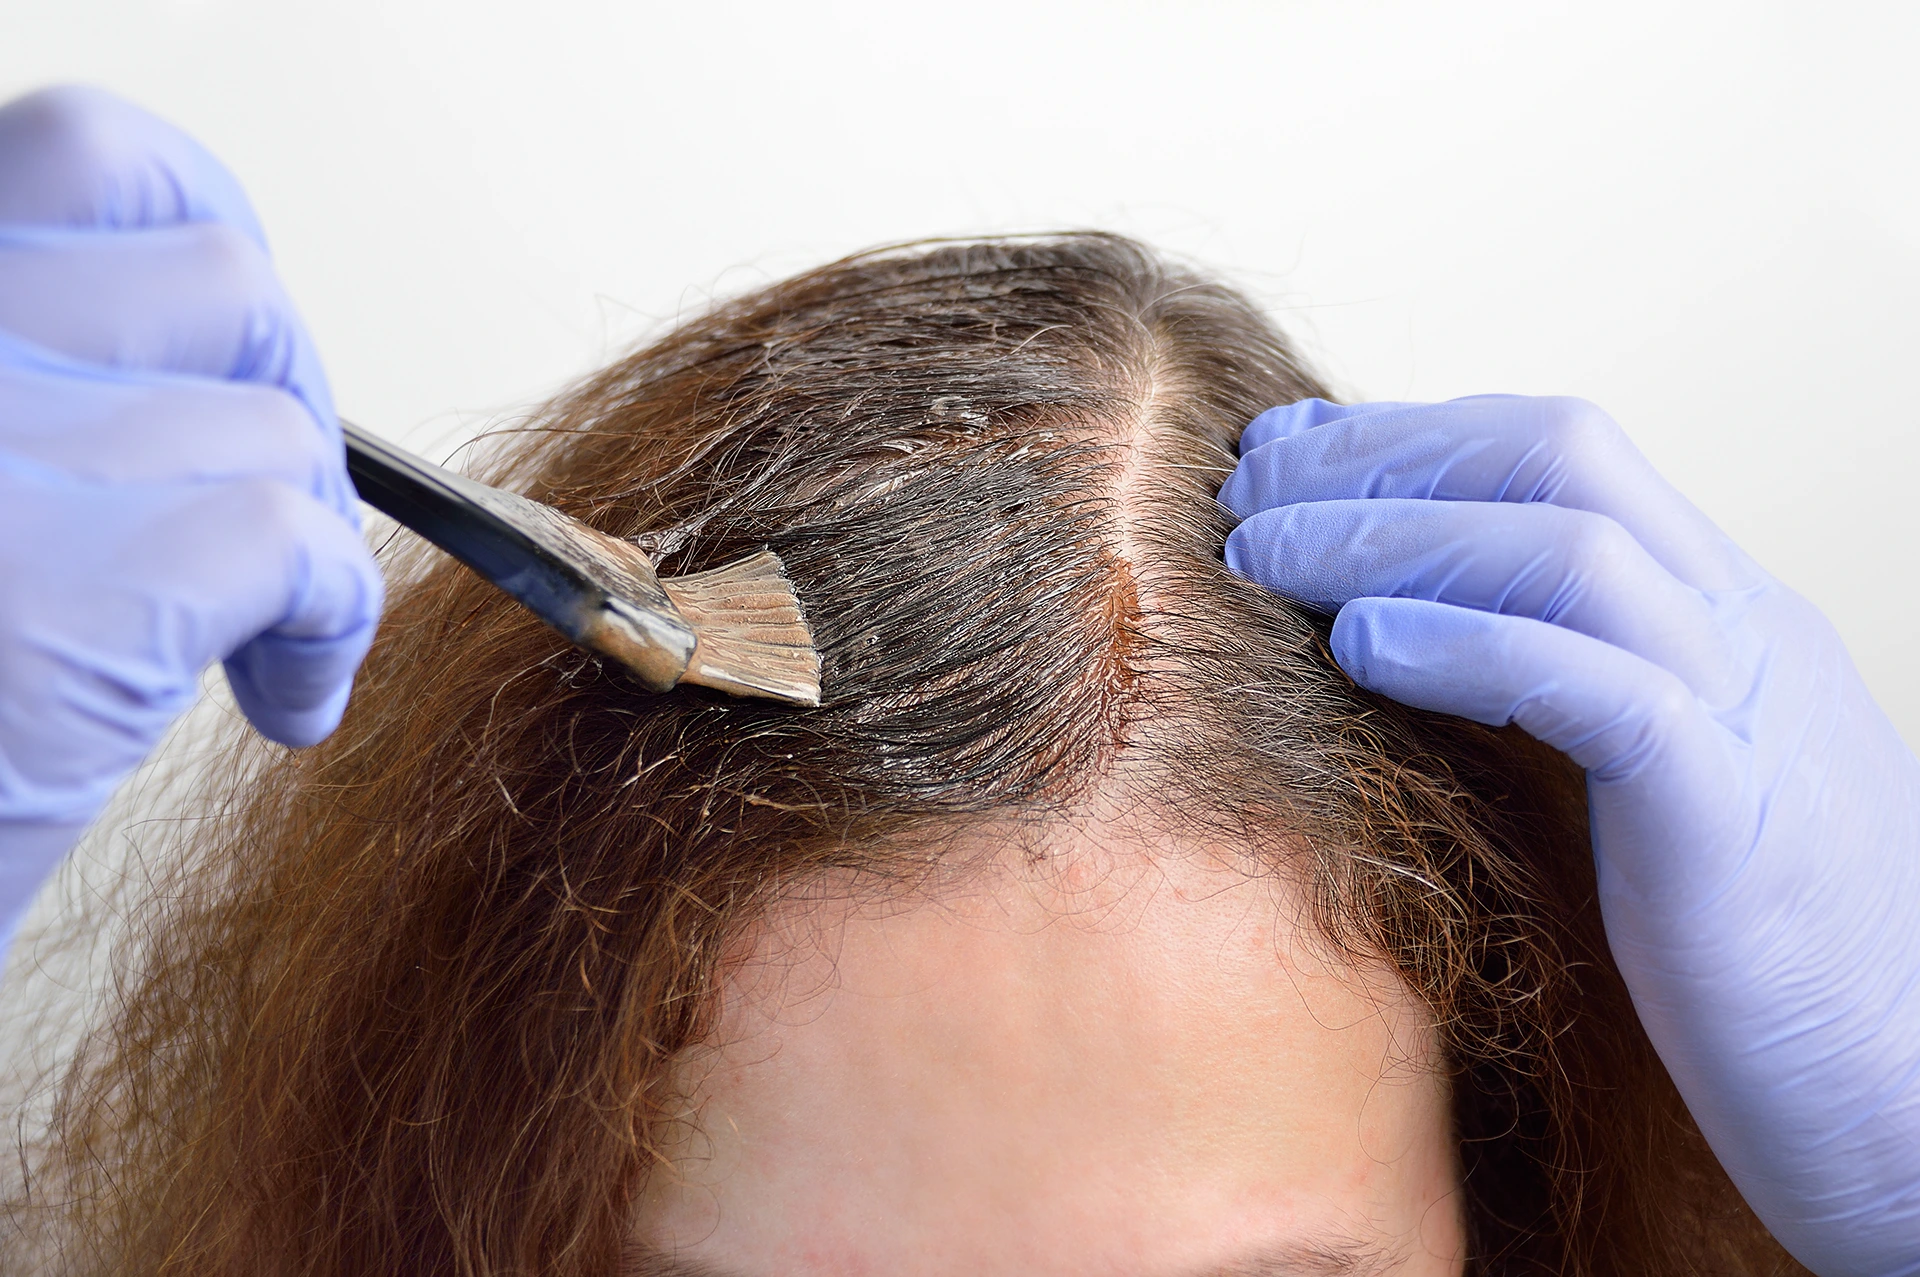 Two hands wearing blue gloves applying hair dye to a woman's brown hair with a brush, focusing on the scalp area.